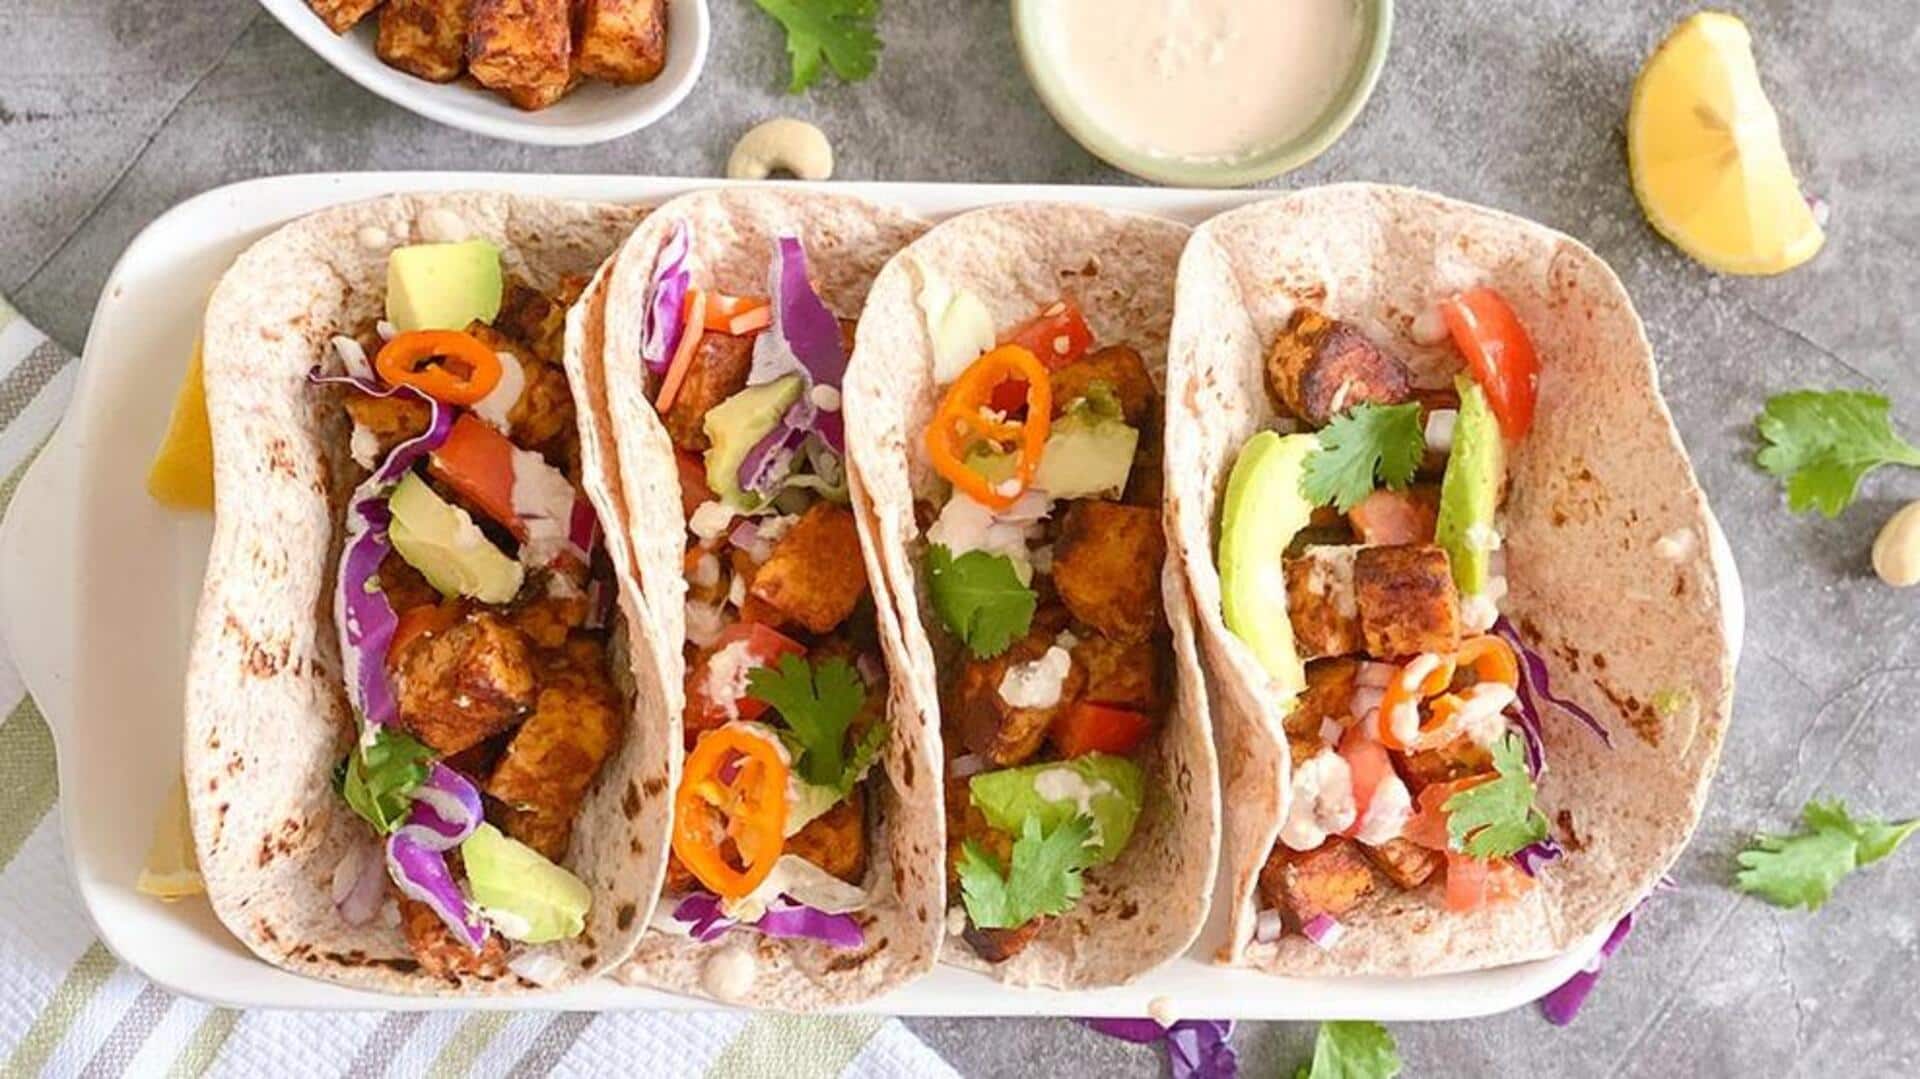 Serve your guests these tempting tempeh tacos